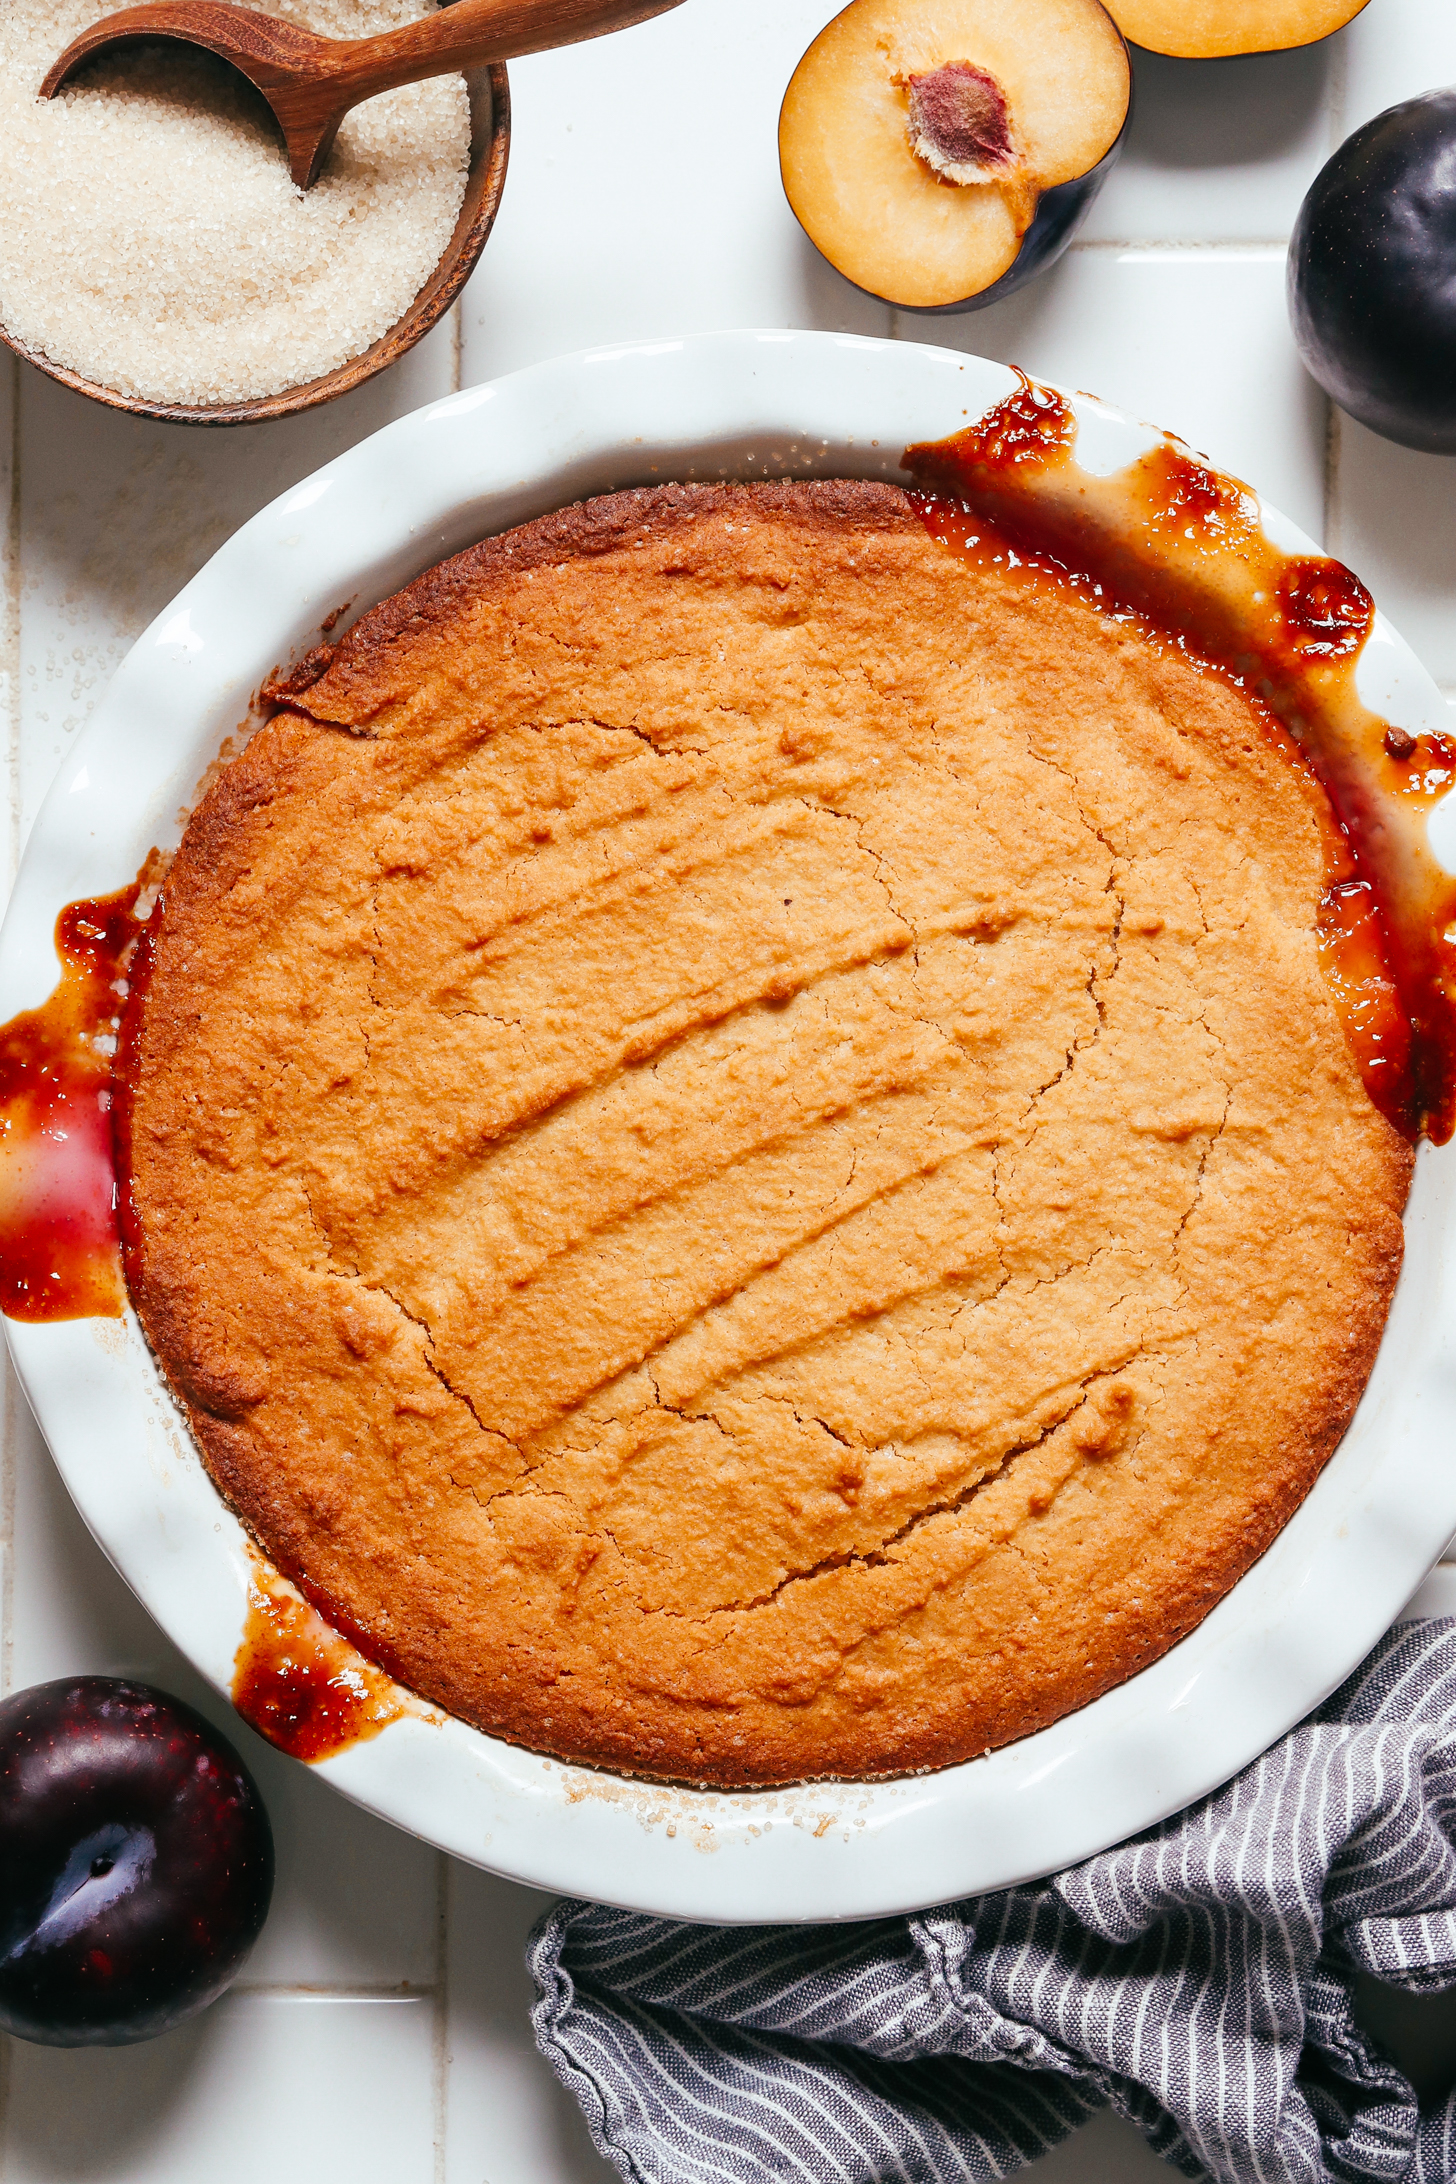 Freshly baked plum upside down cake with a golden brown top and bubbly fruit marking the sides of a pie pan